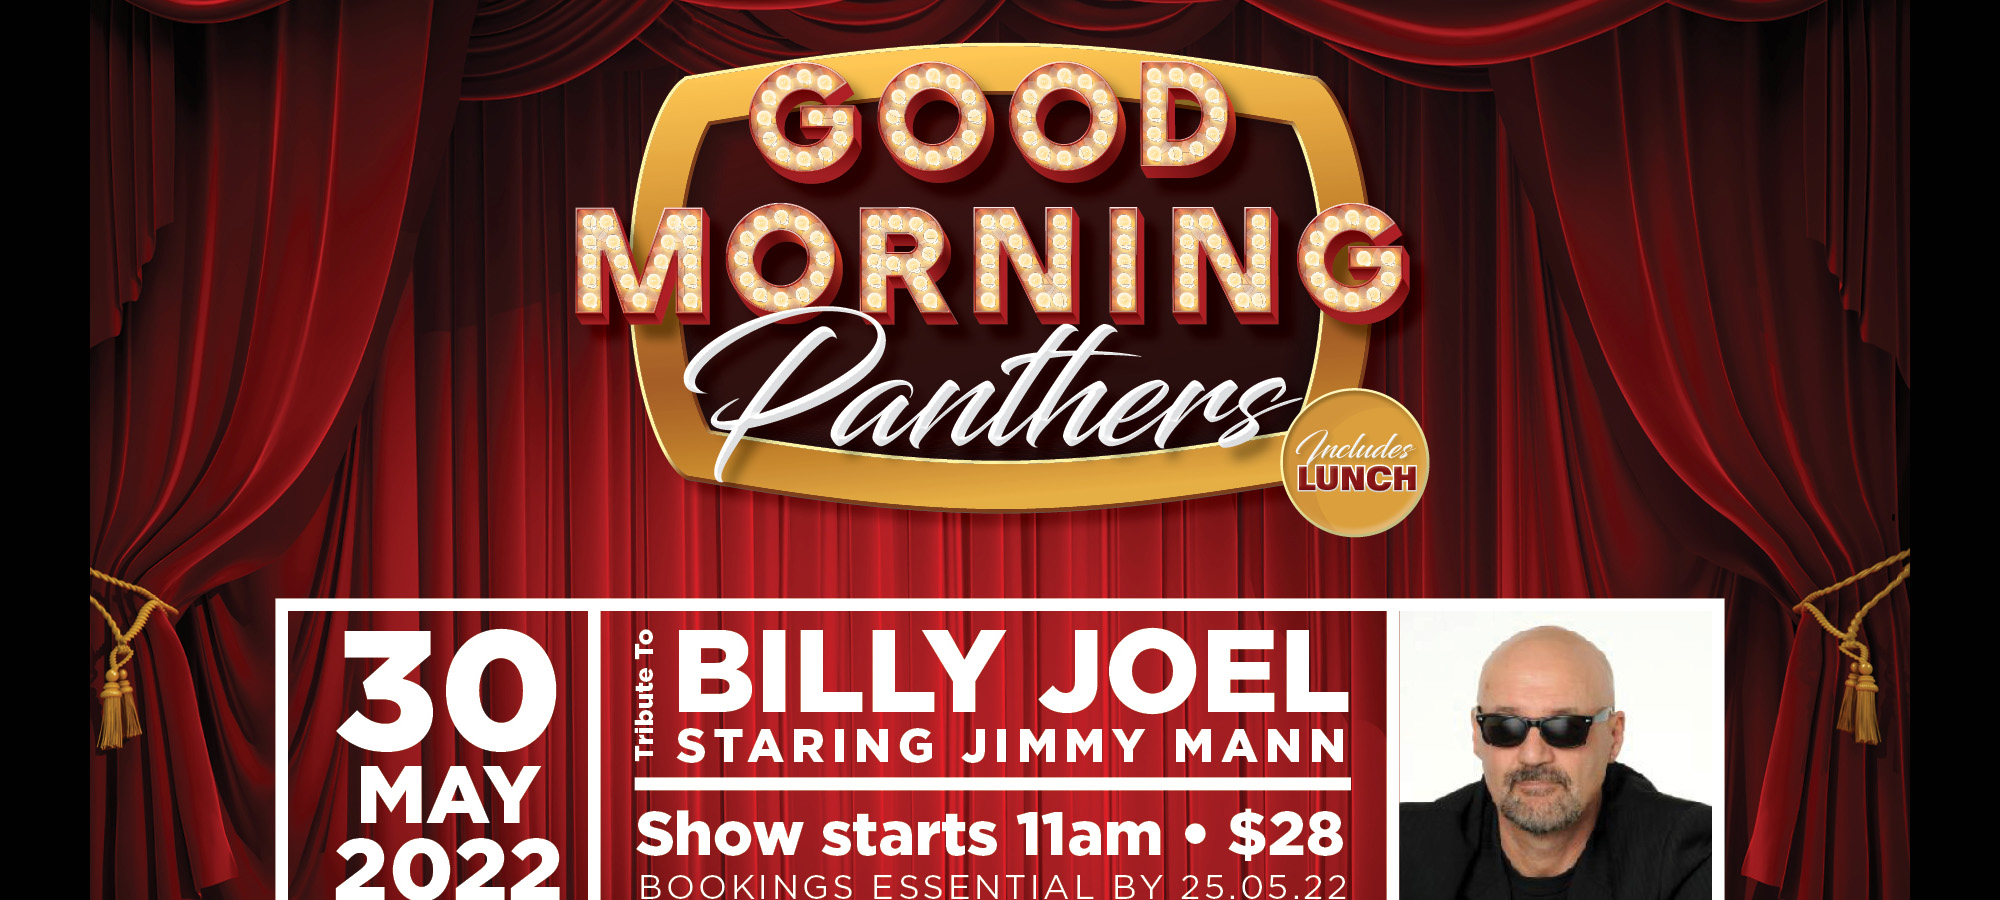 Good Morning Panthers – A Tribute to Billy Joel